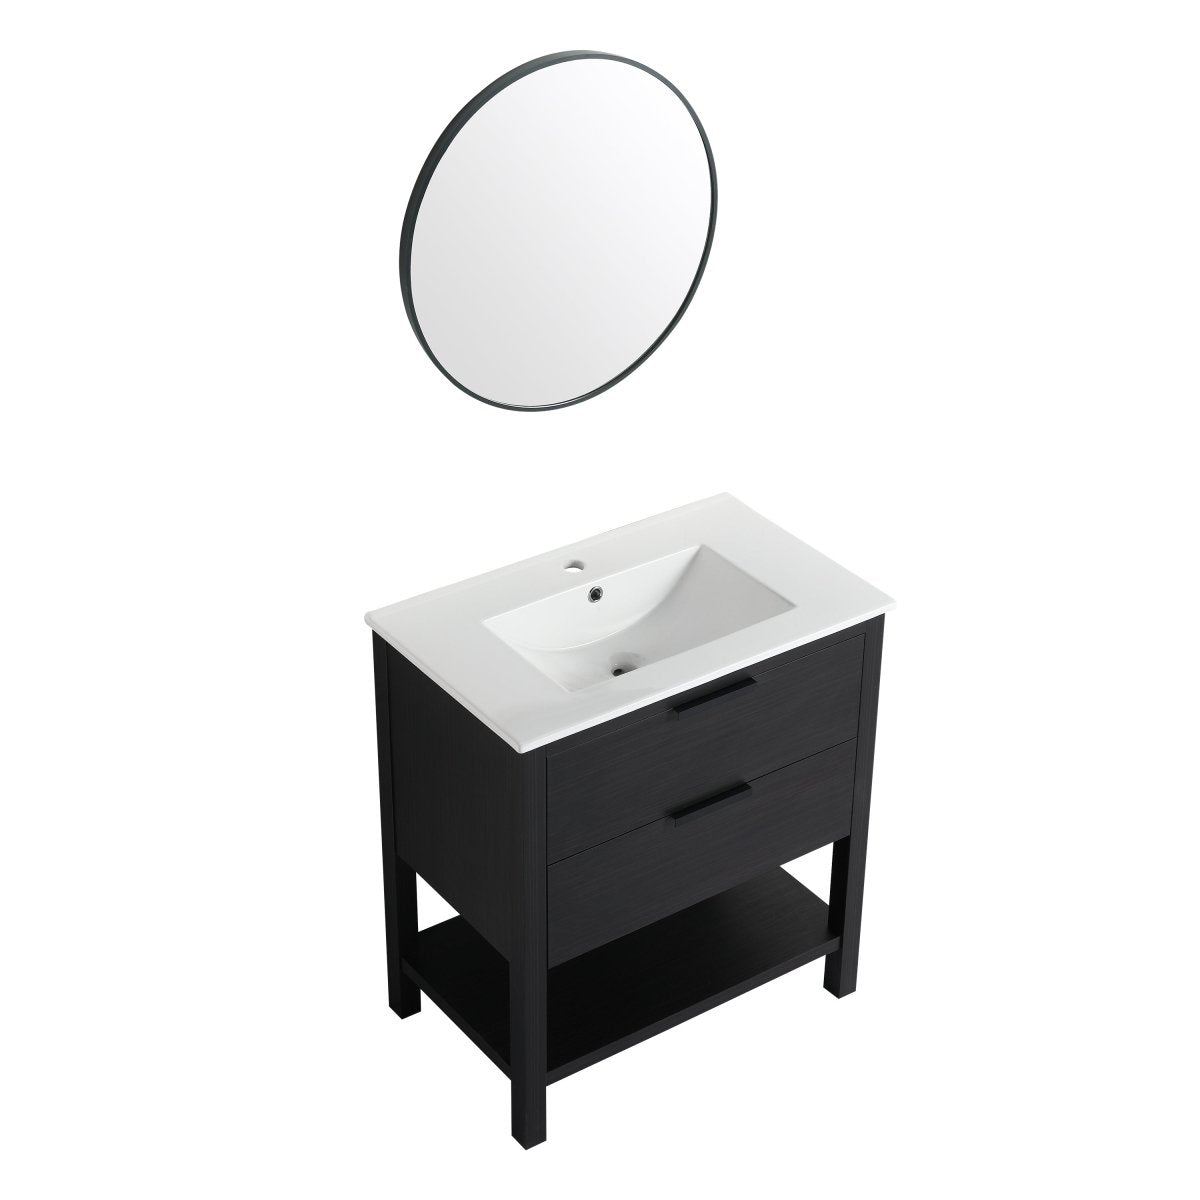 Exbrite 30 inch Bathroom Vanity With Sink and 2 Soft Close Drawers-BVB01030BCT-BL9075B